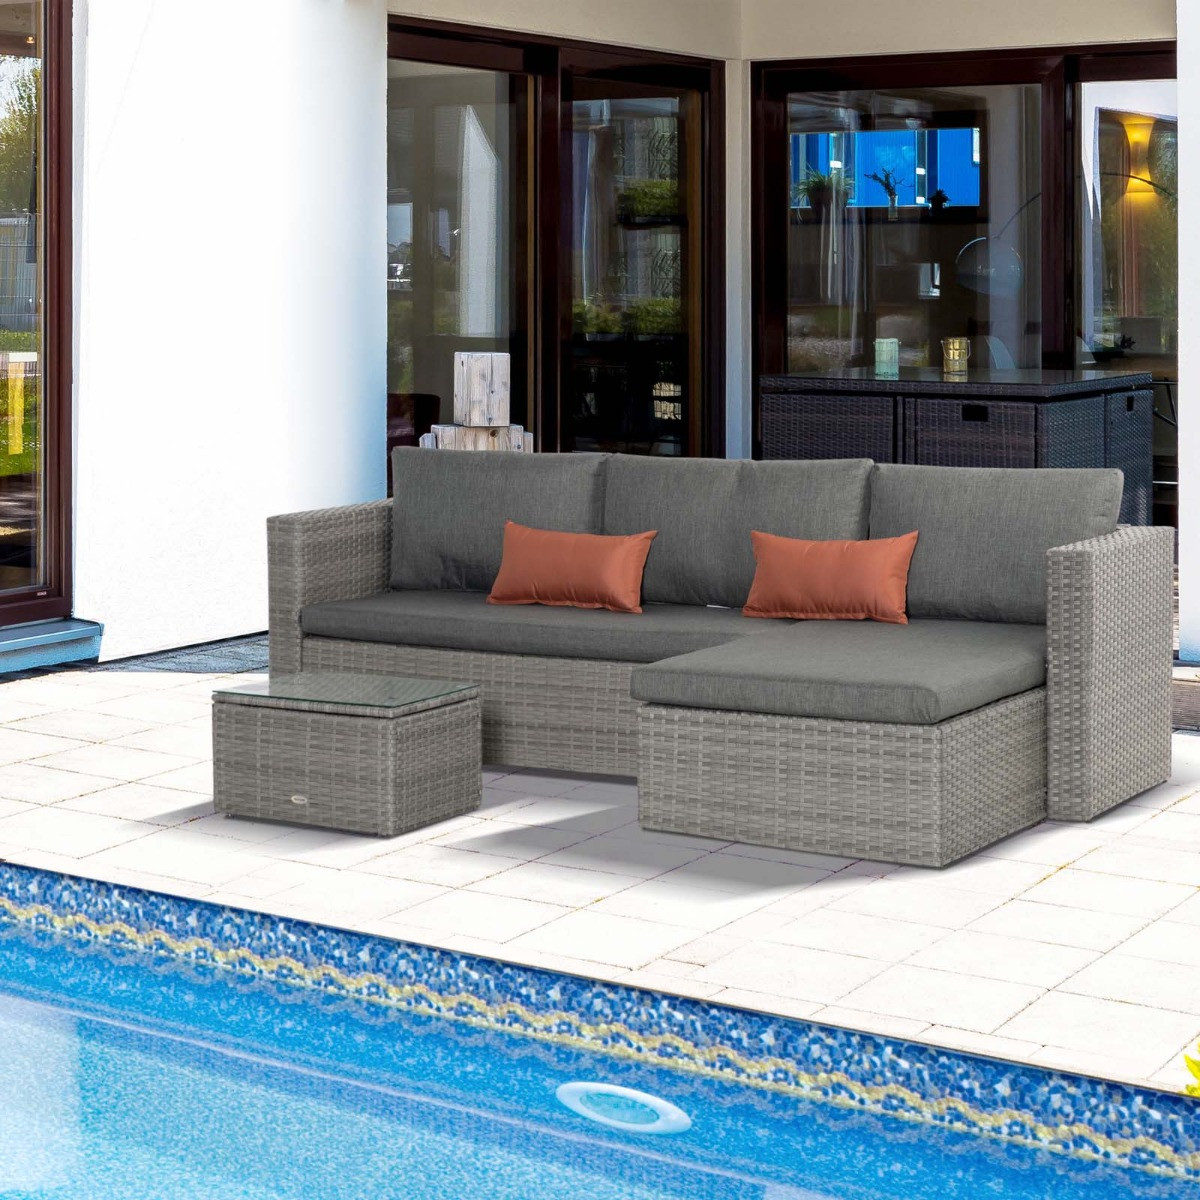 Outsunny Rattan Sofa Set With Coffee Table, 3 Piece - Grey>